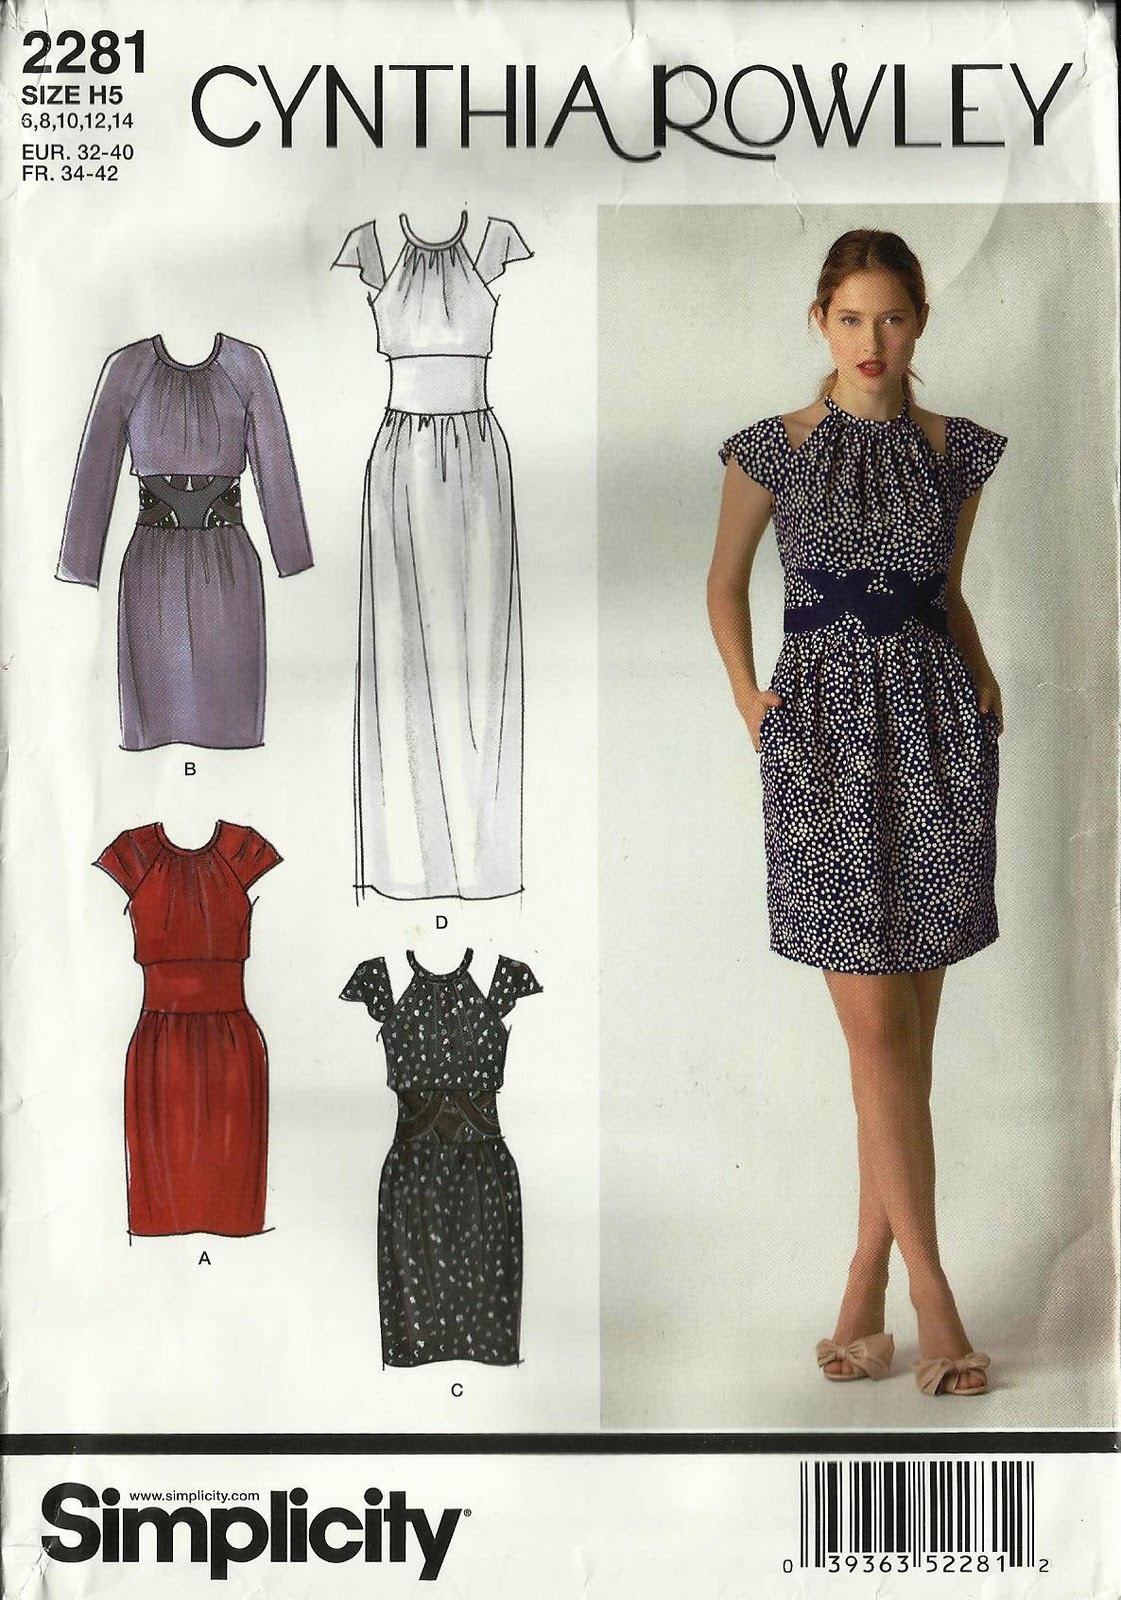 Sew Melodic : Crazy Color Cynthia Rowley Simplicity Sewing Pattern 2281